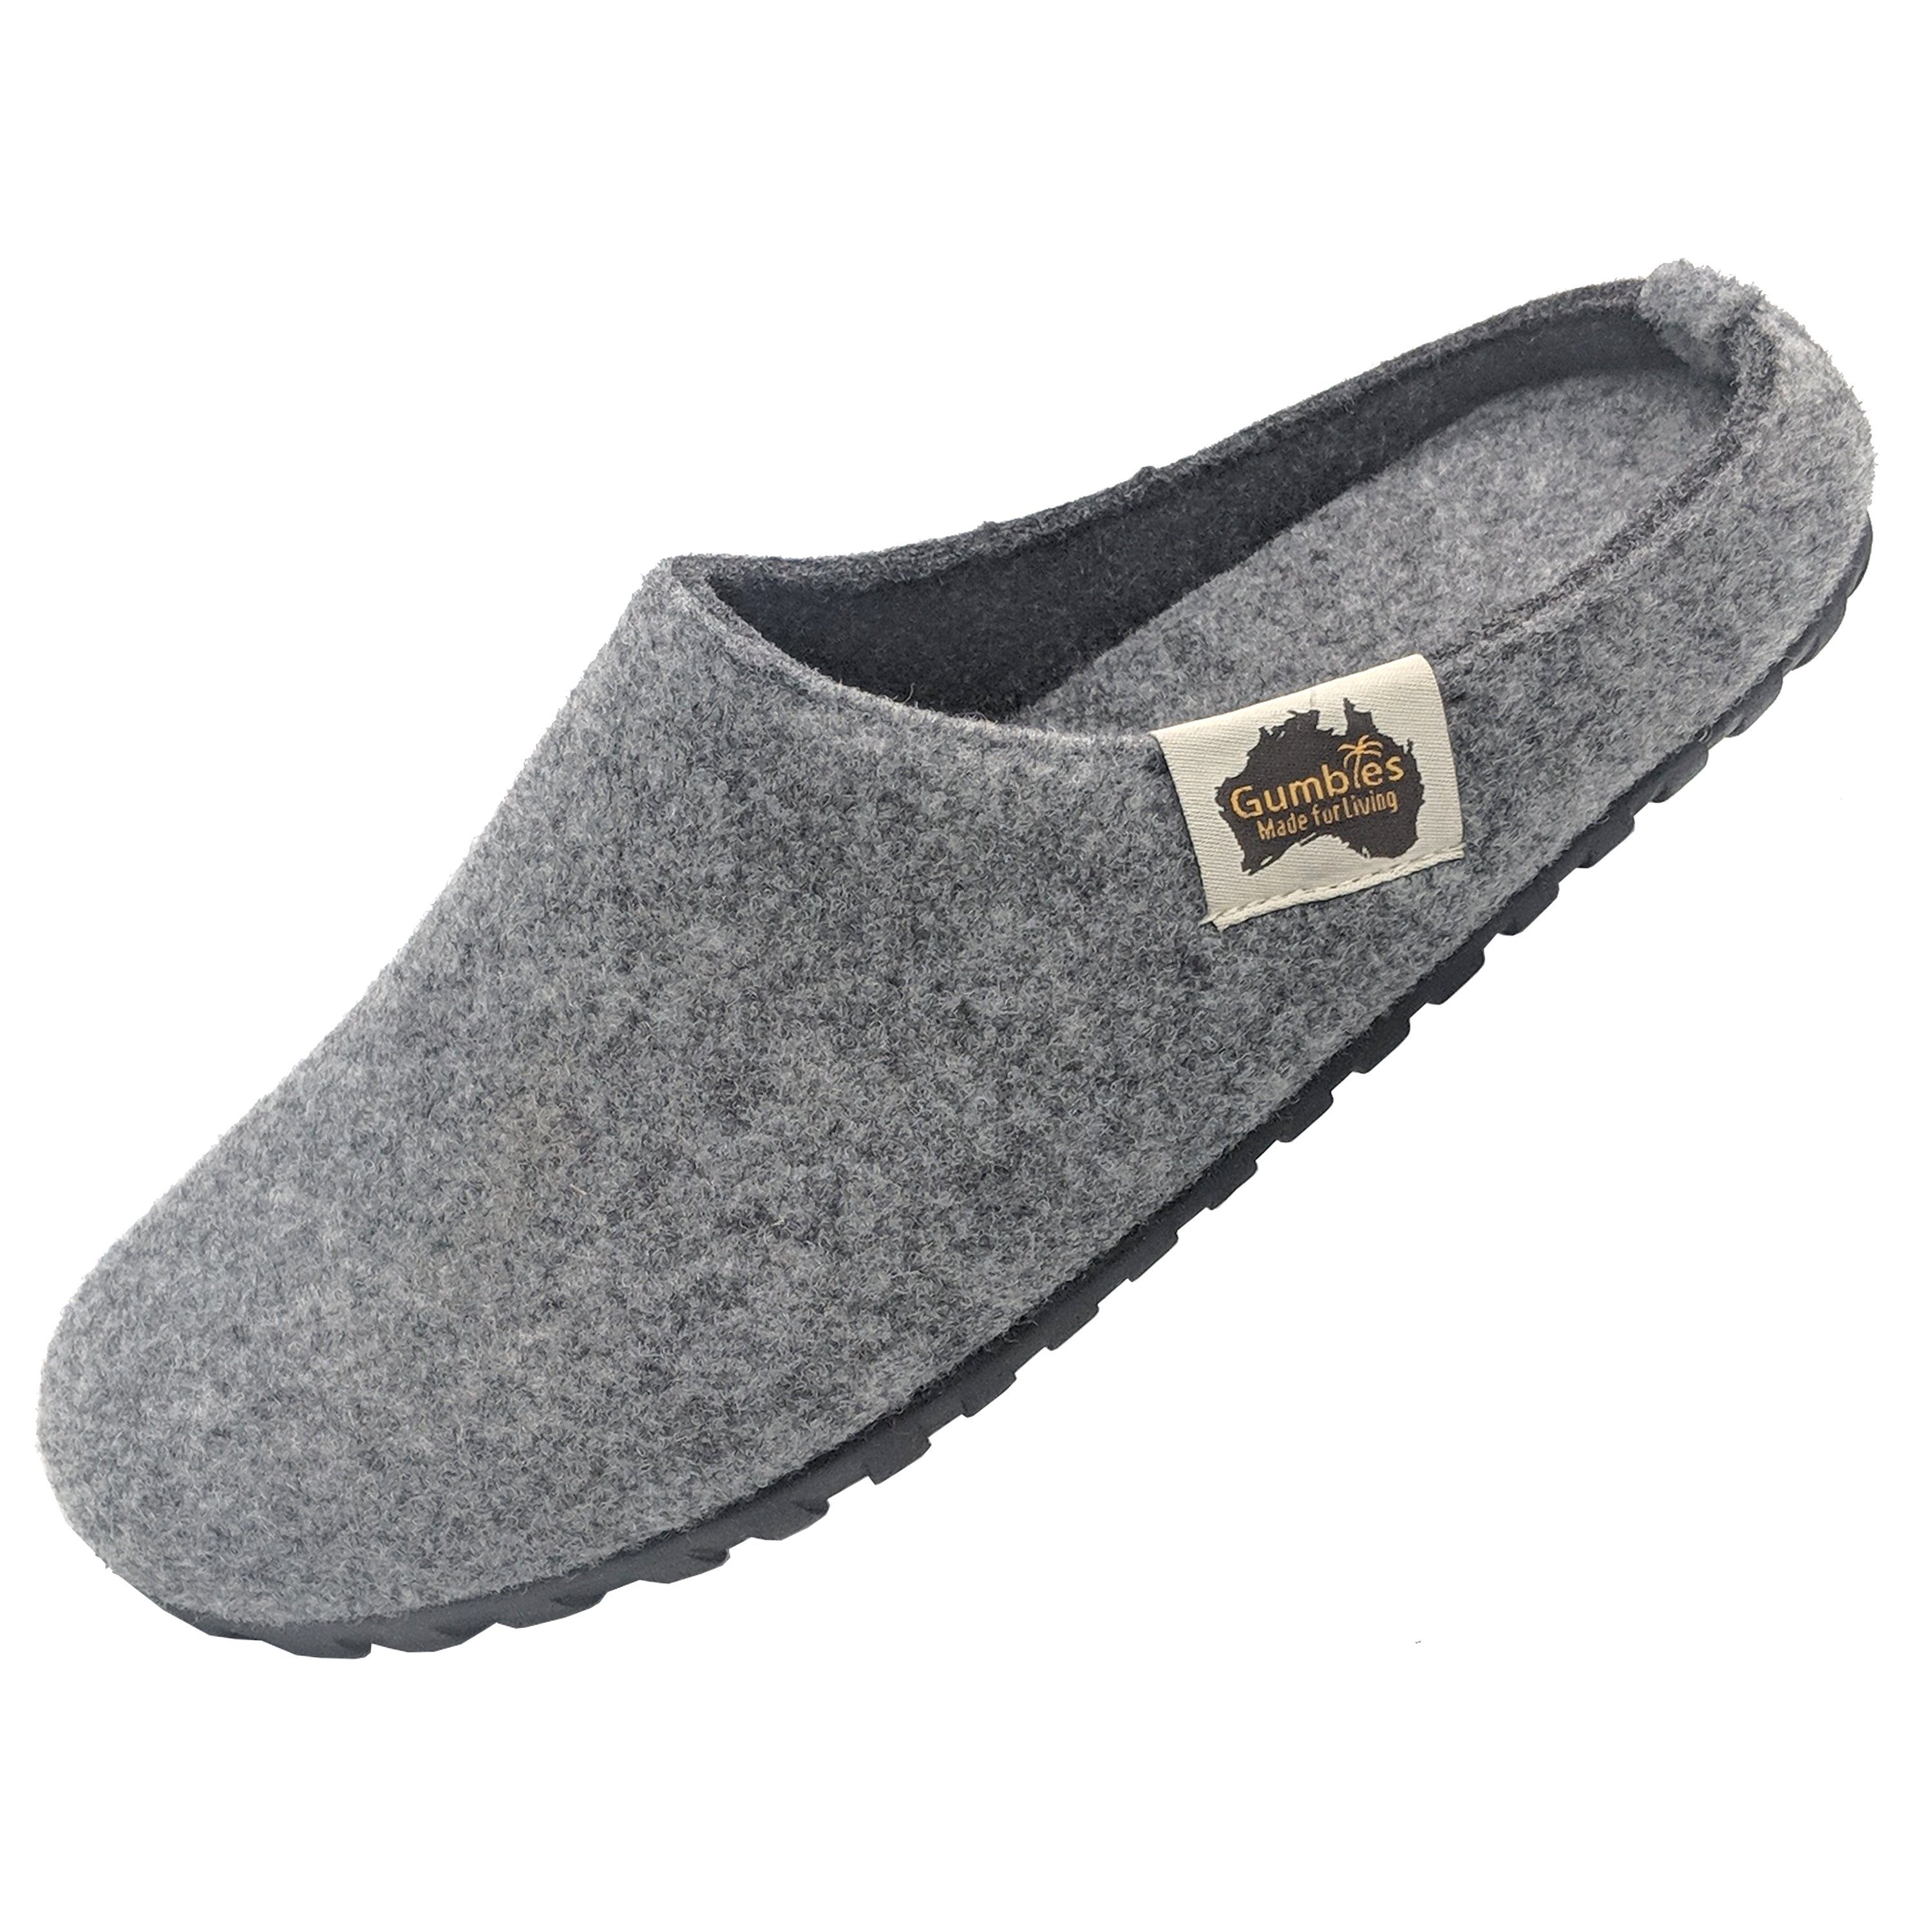 Gumbies Outback Designs« in Hausschuh »in Materialien Charcoal Grey Slipper recycelten aus farbenfrohen